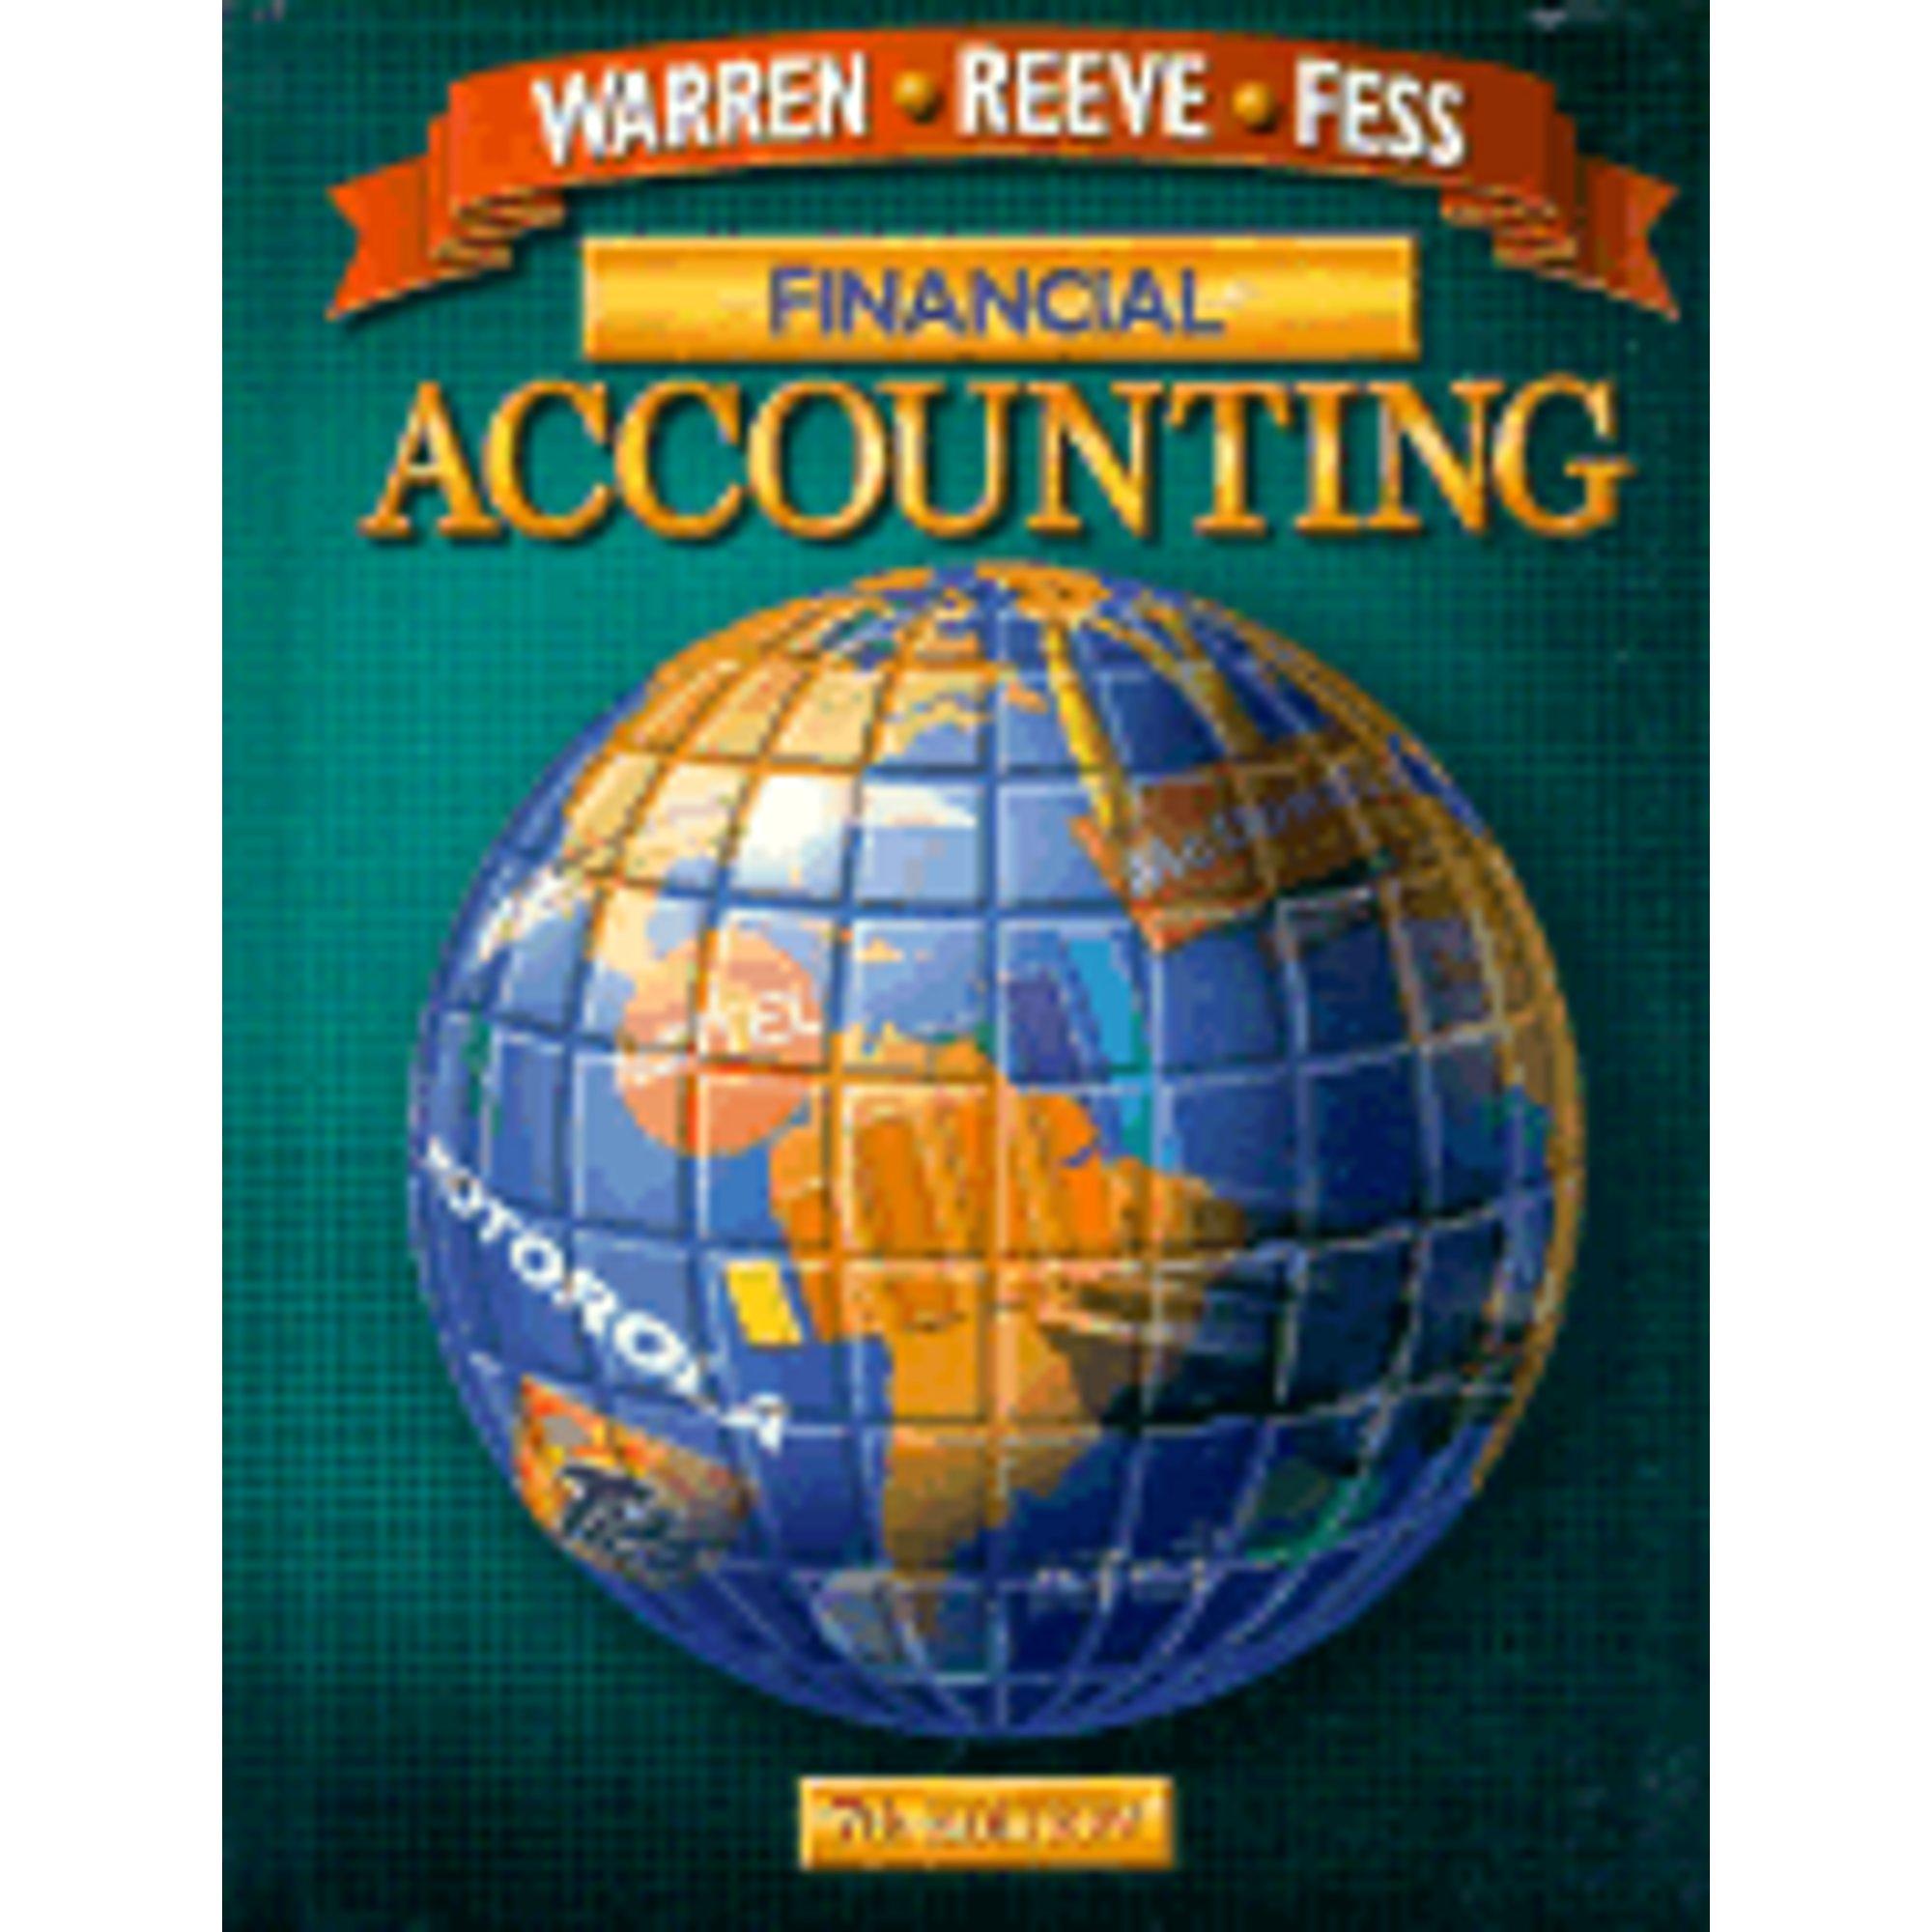 financial accounting 7th edition dr. carl s warren, dr. james m reeve, philip e fess 0538874139, 9780538874137